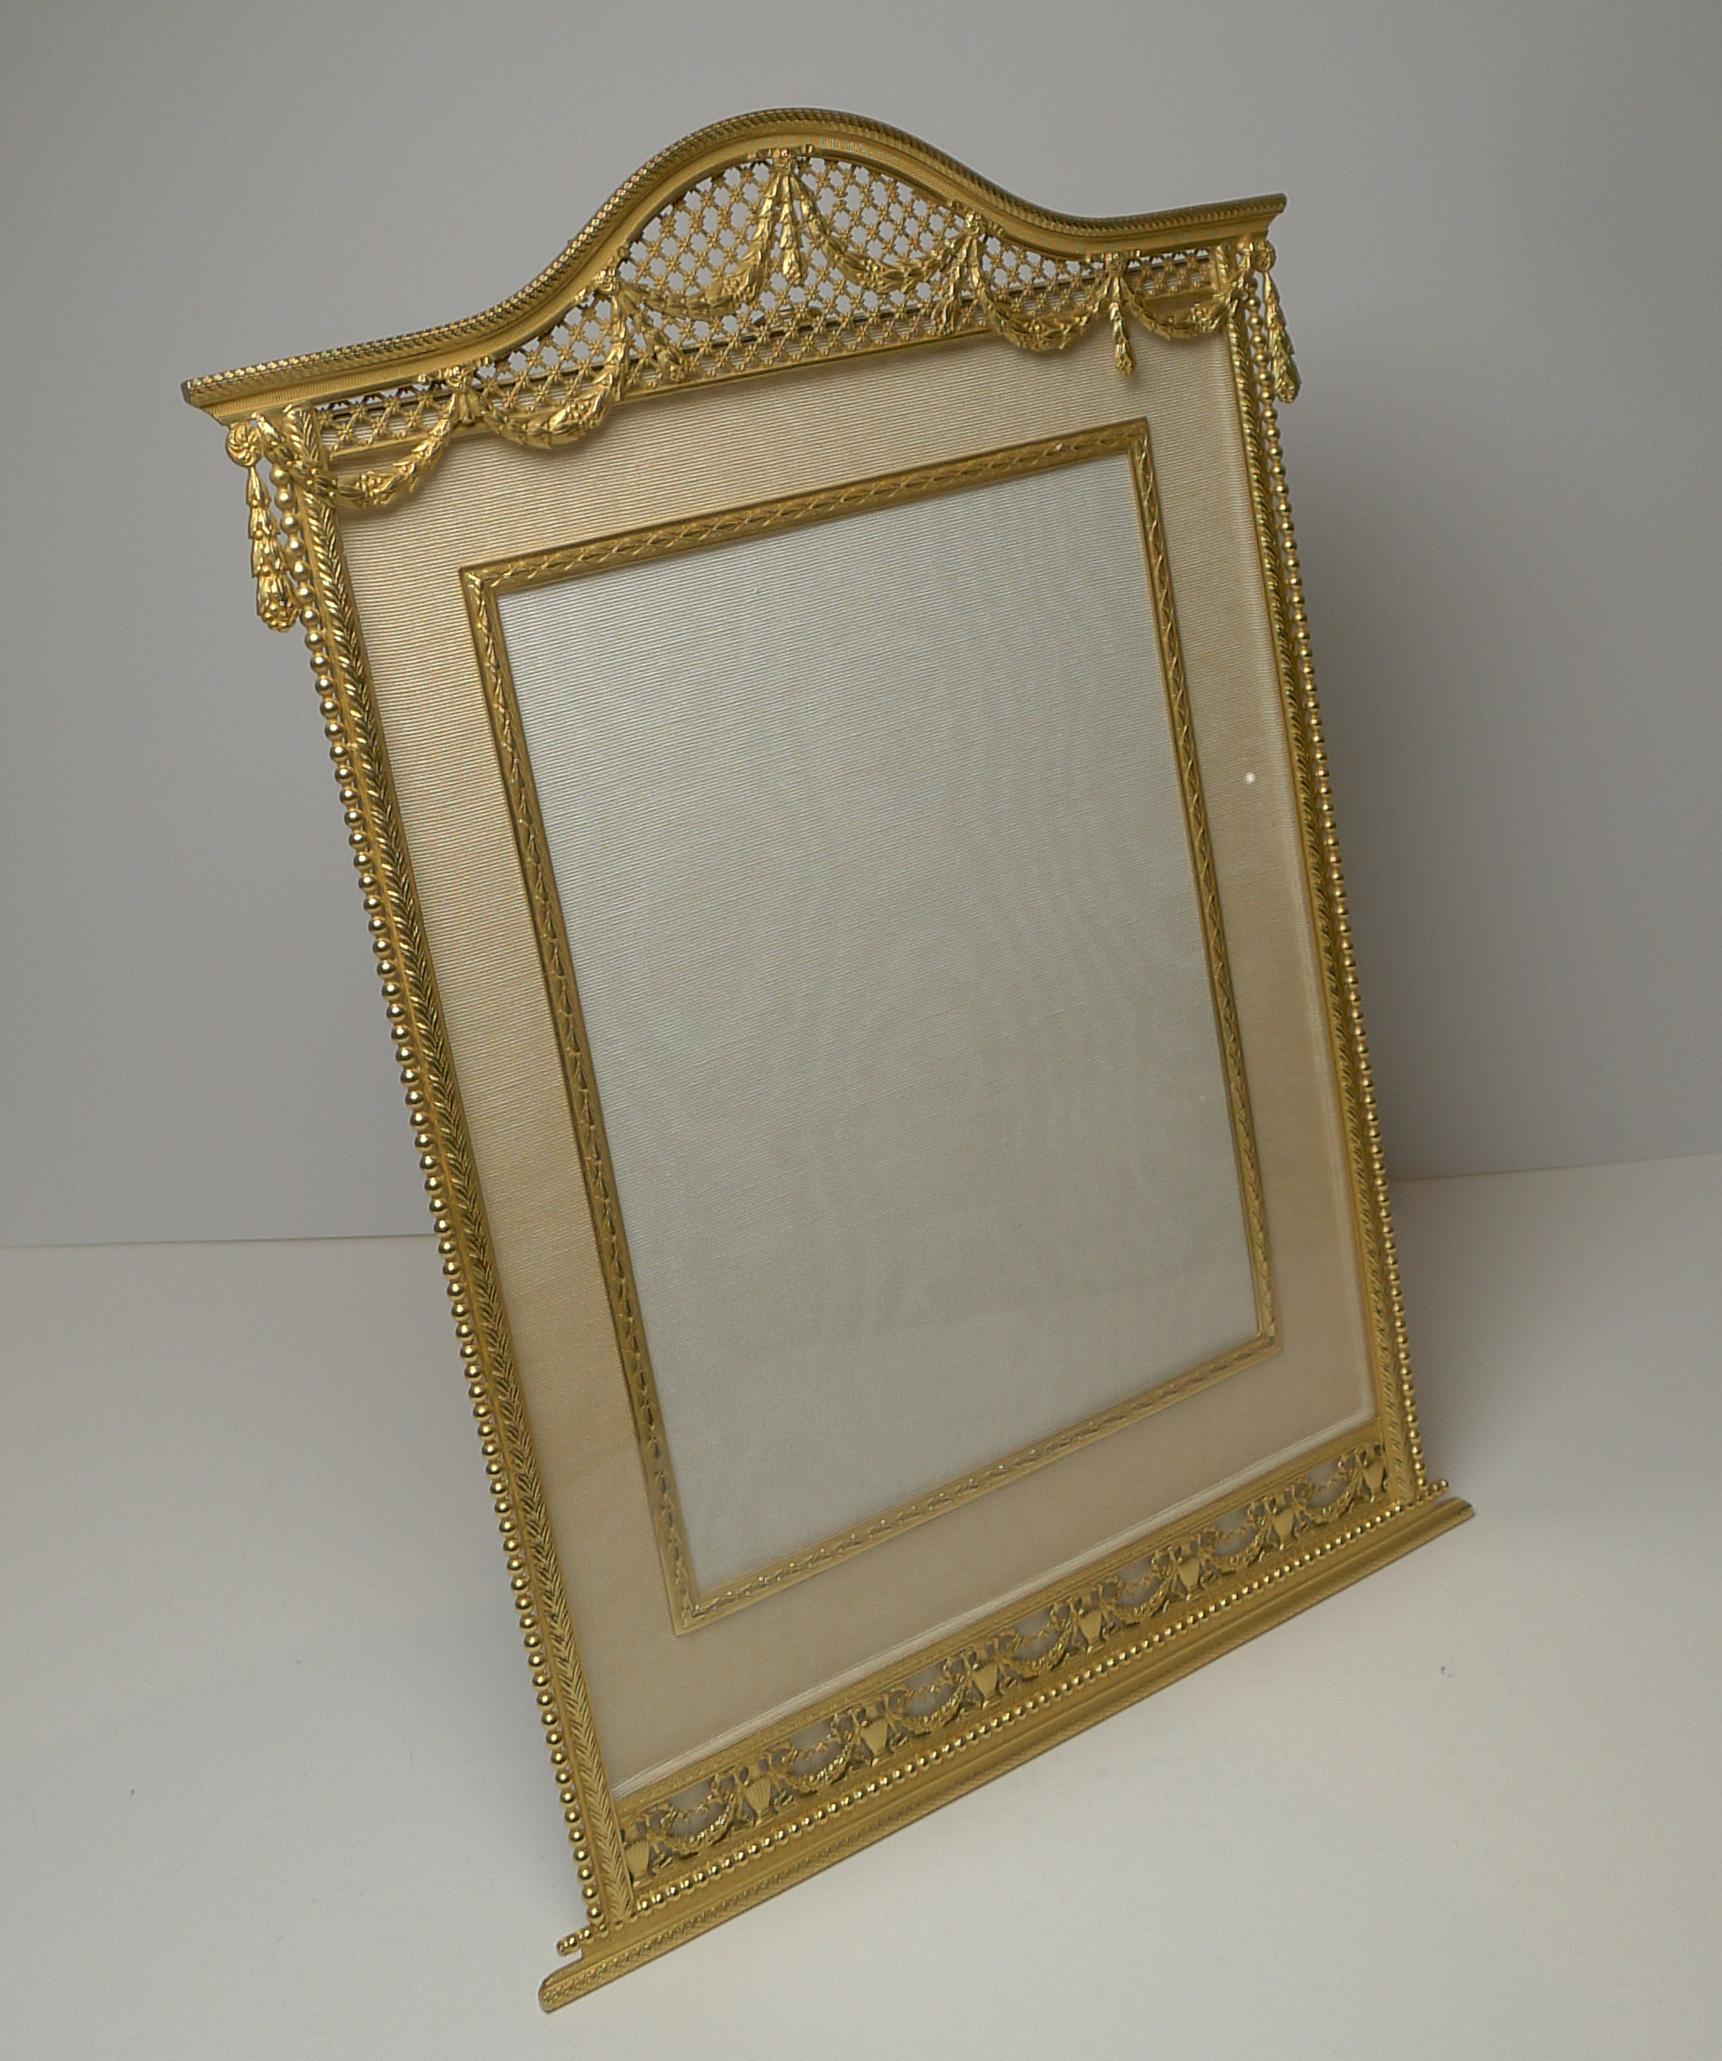 Grand Large Gilded Bronze Photograph / Picture Frame c.1910 For Sale 4